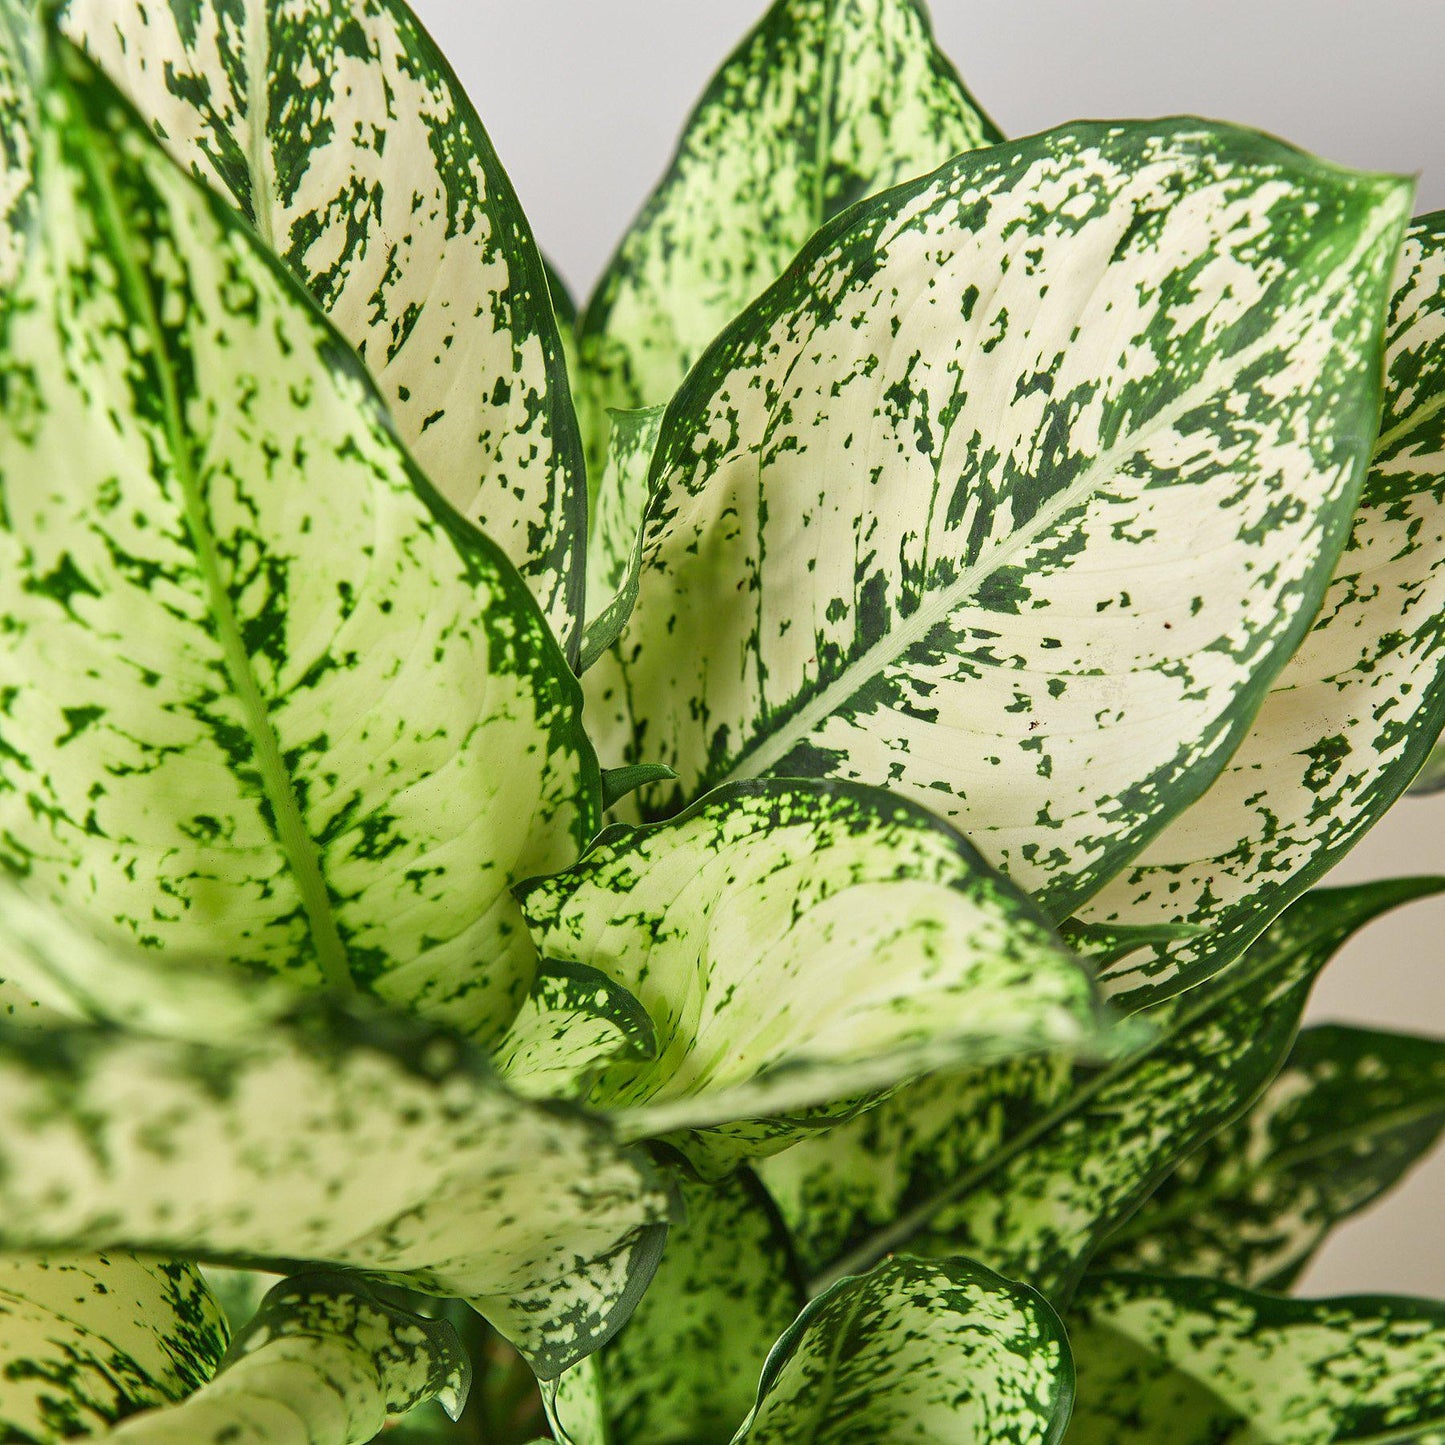 Chinese Evergreen 'First Diamond' - Diamond in the Rough: Low-Maintenance, Striking Variegated Houseplant